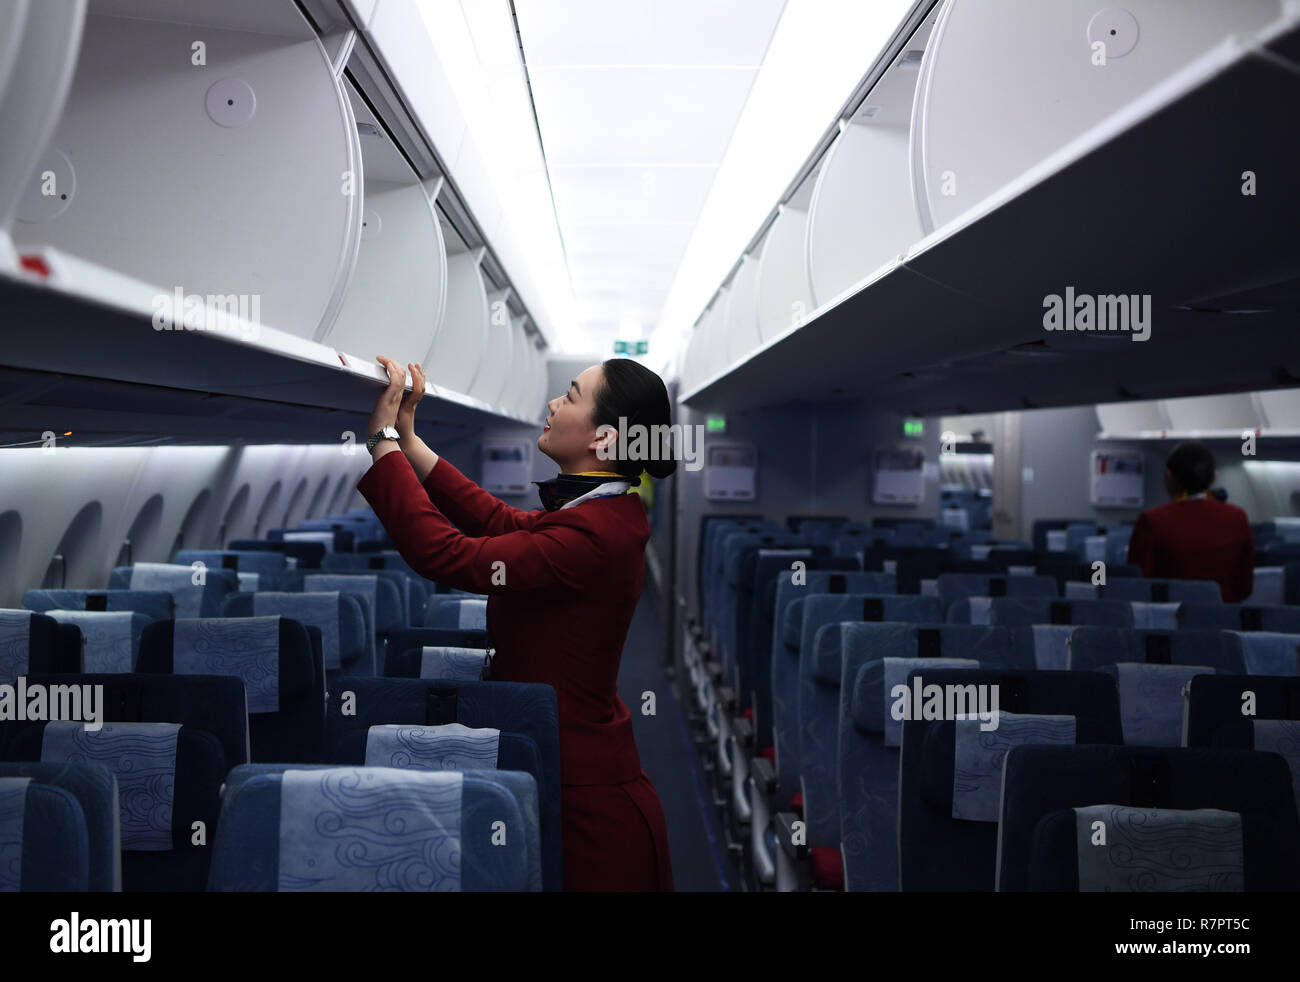 (181211) -- BEIJING, Dec. 11, 2018 (Xinhua) -- A stewardess checks the compartment on flight CA935 after arrival at Frankfurt Airport in Frankfurt, Germany, Dec. 1, 2018. The Civil Aviation Administration of China published an action plan on Monday, aiming to make China's civil aviation industry one of the best in the world by 2050. Under the plan, from 2021 to 2035, China will comprehensively enhance the strength of its civil aviation industry to not only take the lead in air transportation, but also have the world's most competitive airlines and aviation hubs, advanced air service Stock Photo